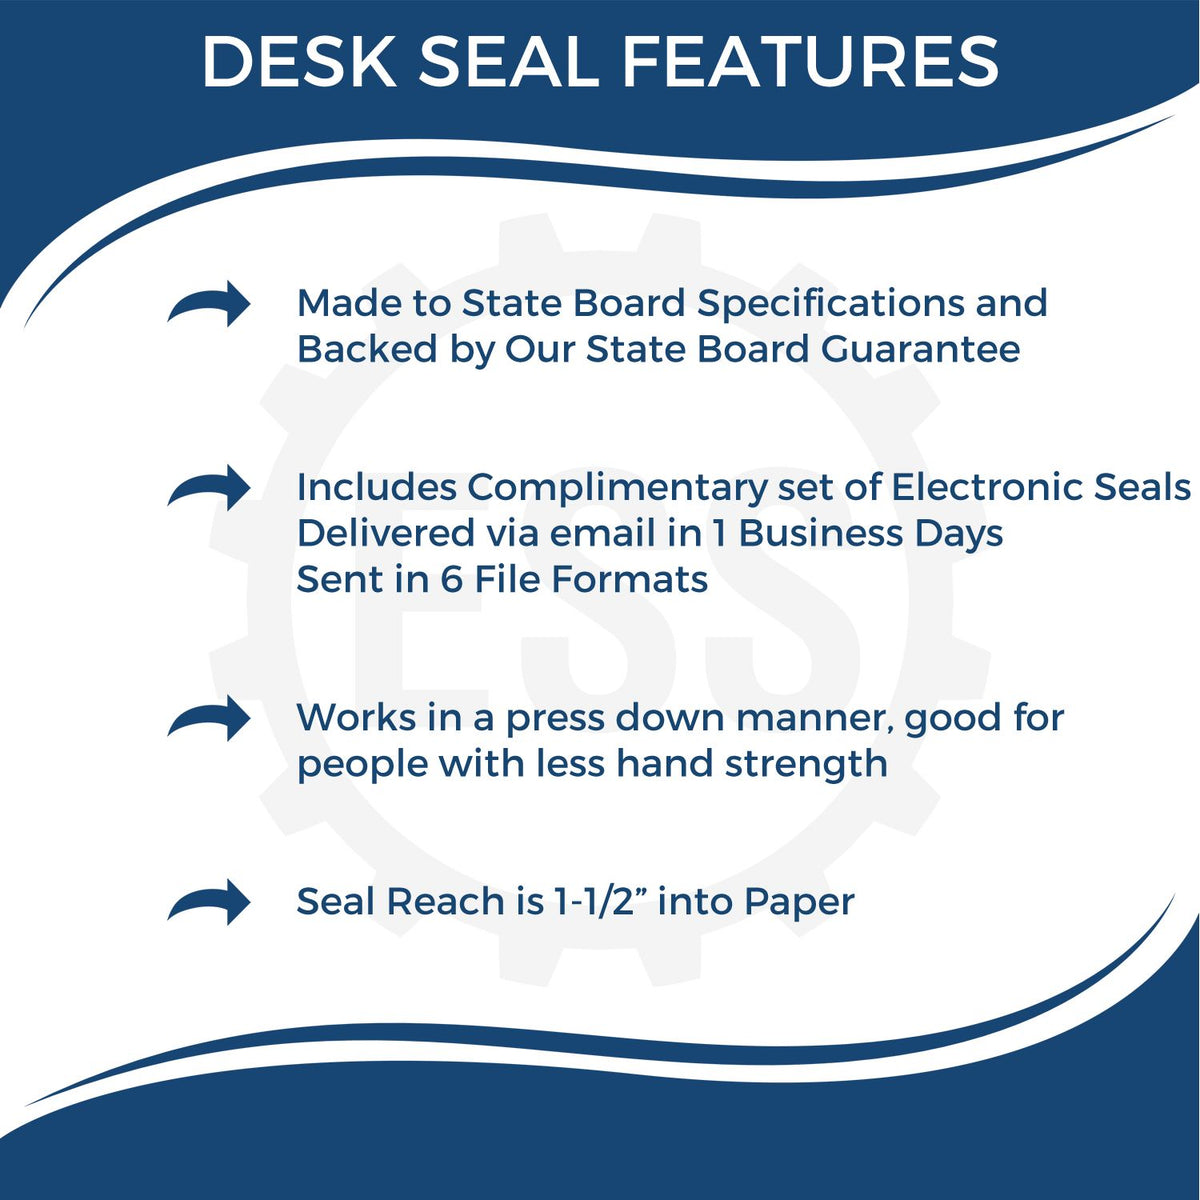 A picture of an infographic highlighting the selling points for the Kansas Desk Architect Embossing Seal